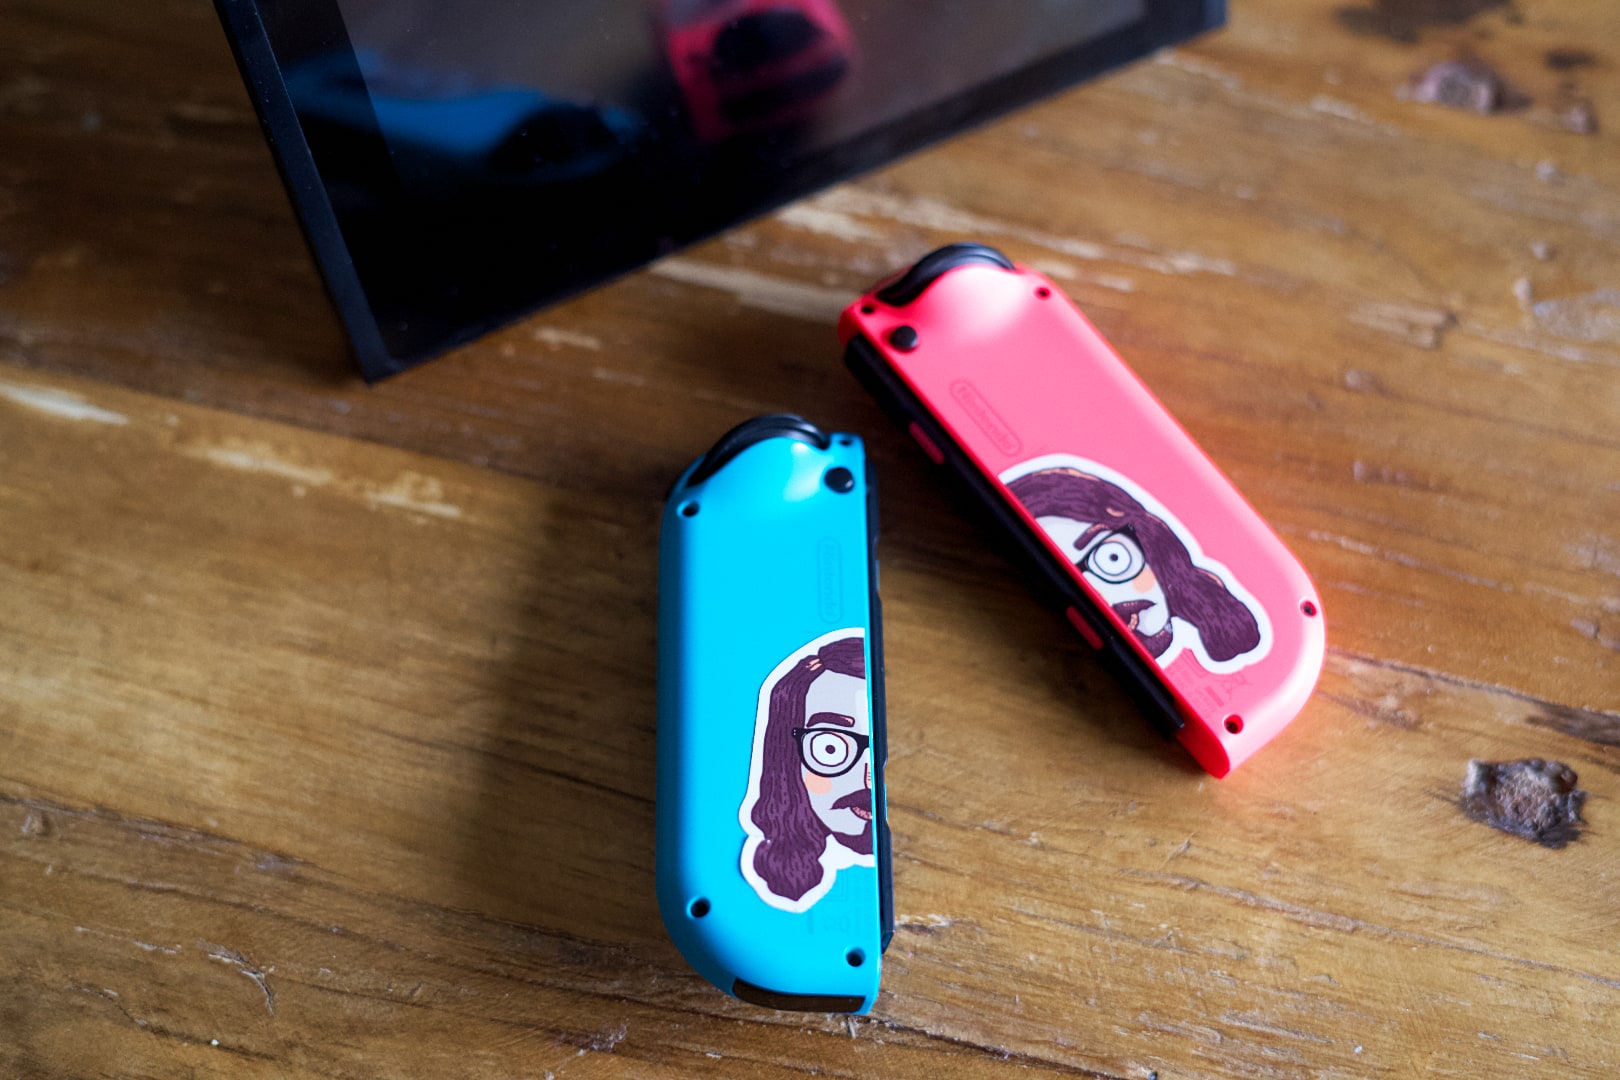 A pair of Joy-Con controllers with a sticker on the back featuring the head of a guy with long, brown hair, glasses, and a beard. The sticker is split in half, one for each controller.